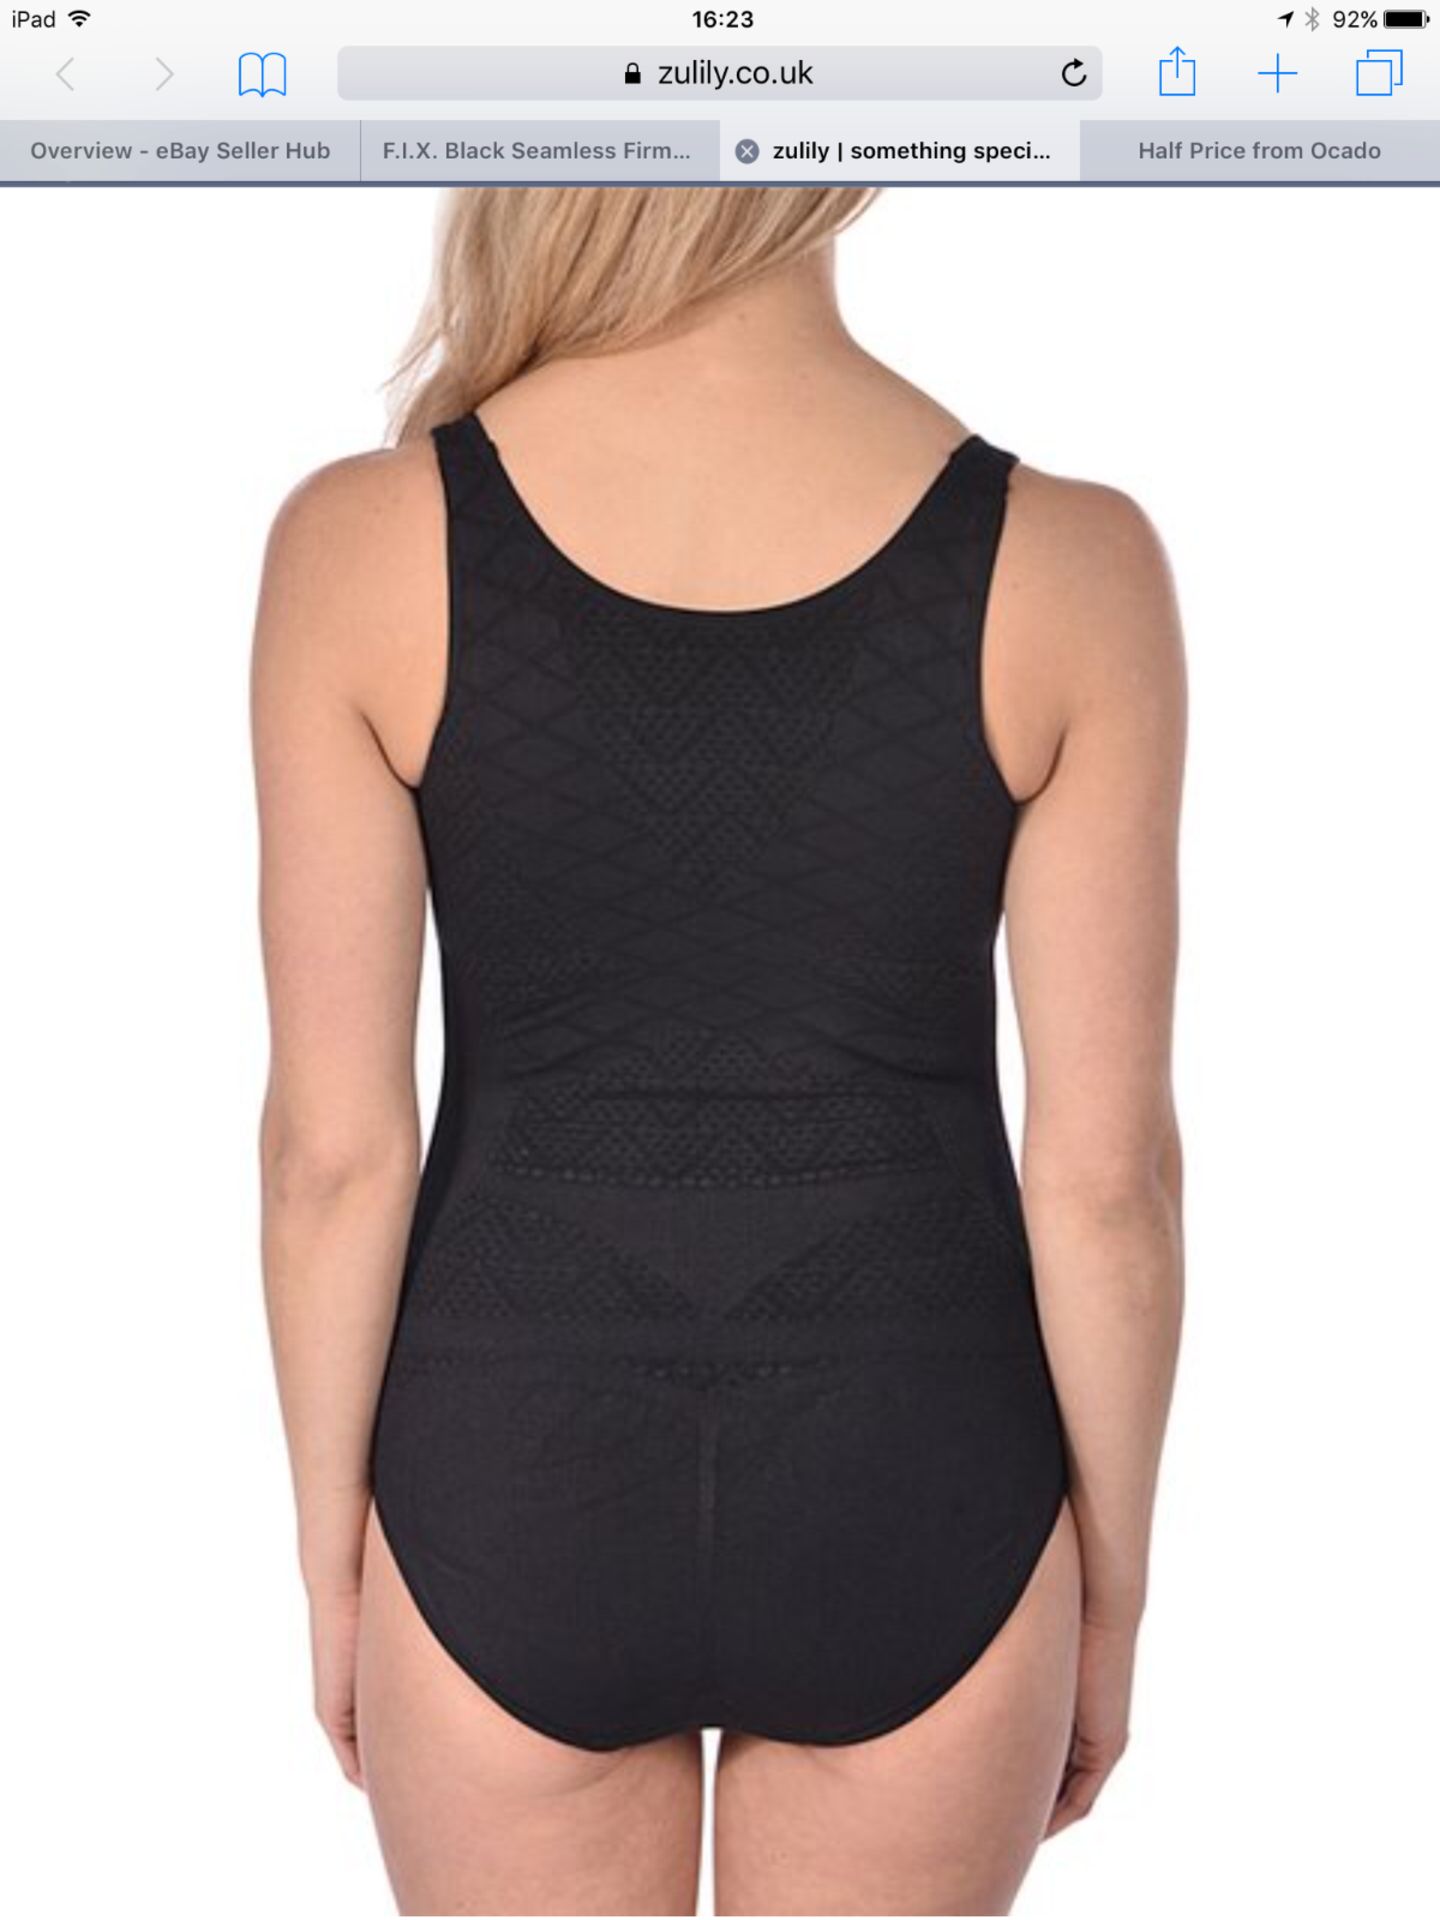 F.I.X. Black Seamless Firm Compression Underbust Bodysuit, Size S/M (New With Tags) [Ref: -T-] - Image 3 of 5